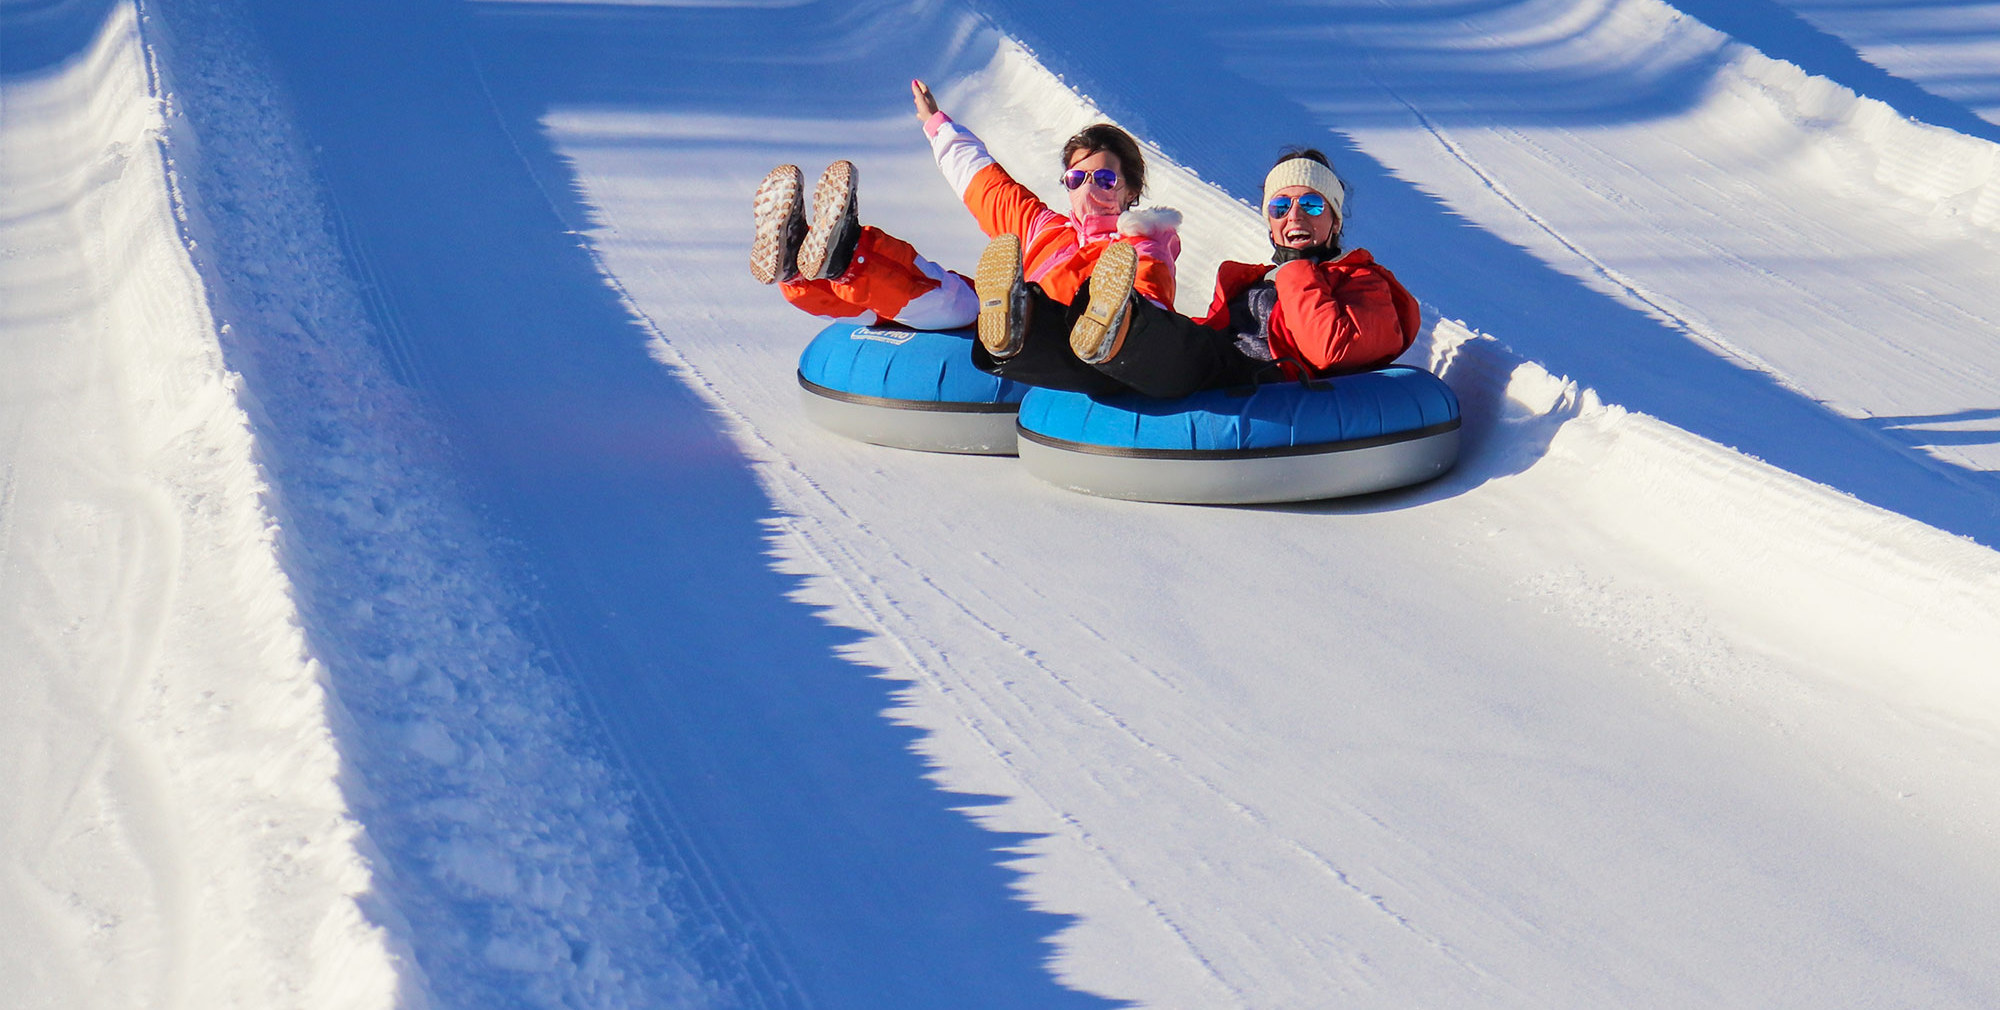 A family at the top of the tubing hill.